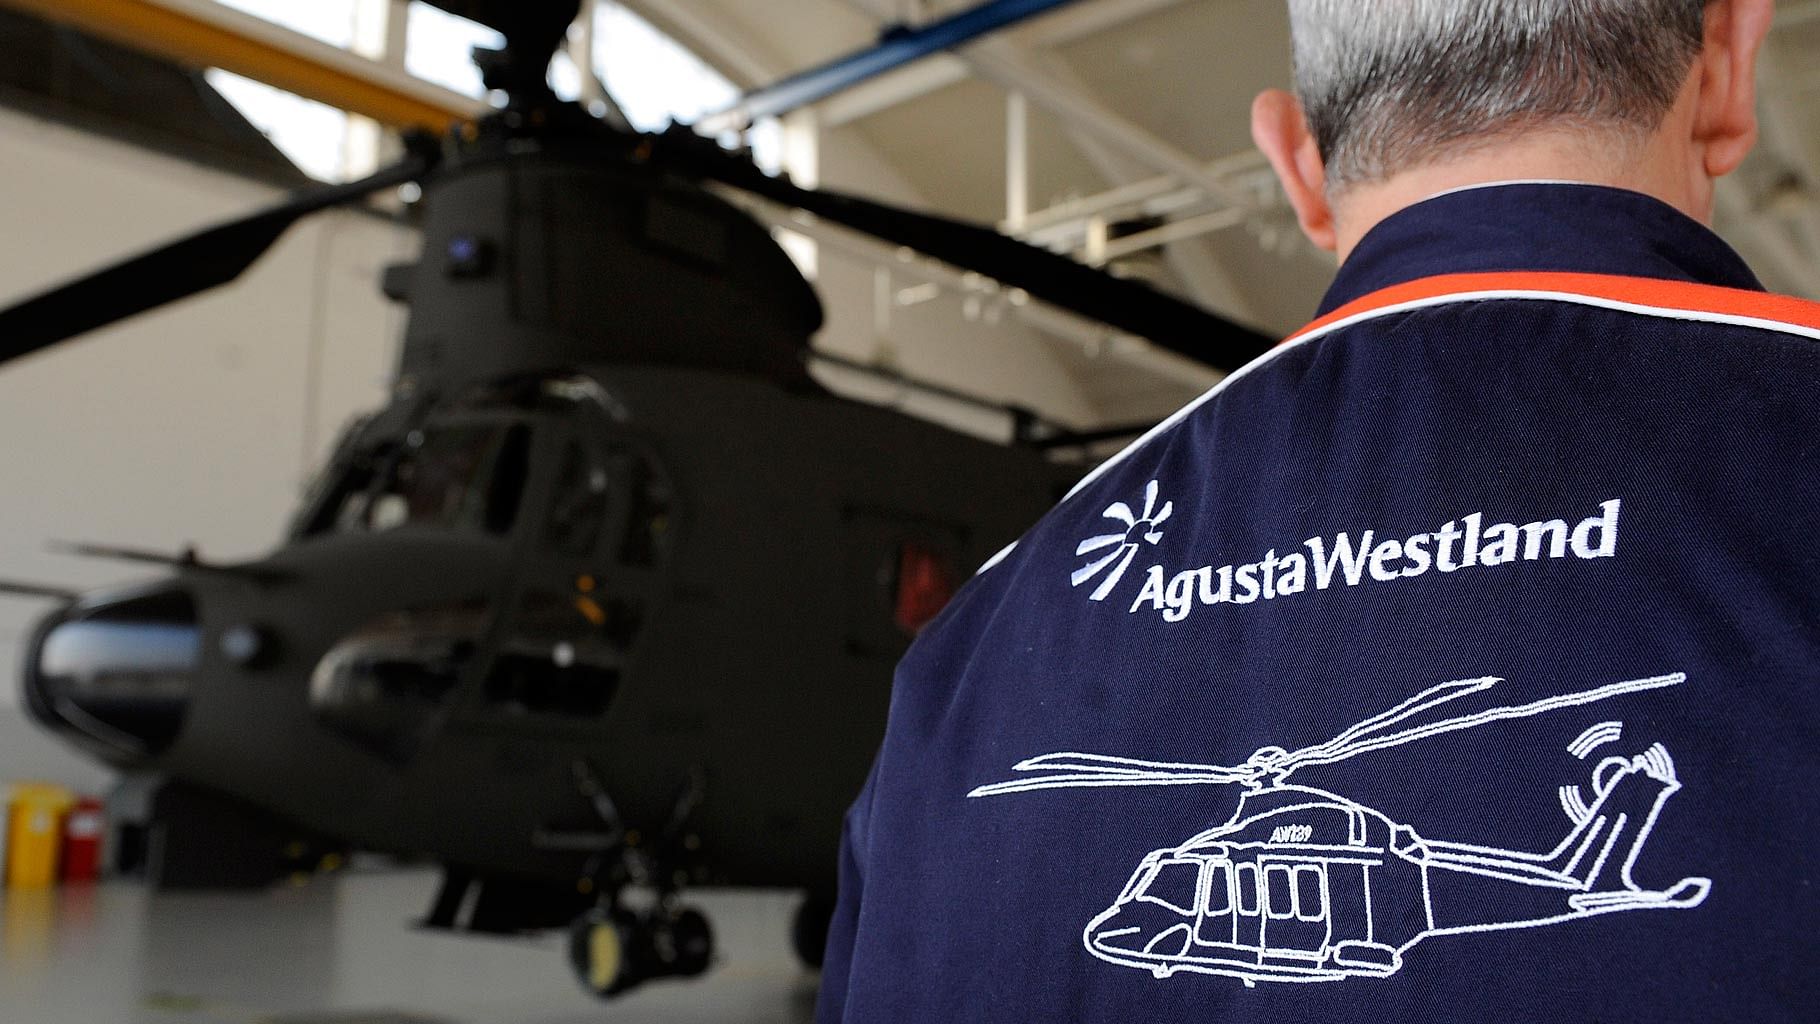 Christian Michel James is one of the three alleged middlemen being probed in the AgustaWestland scam case. (Photo: Reuters)